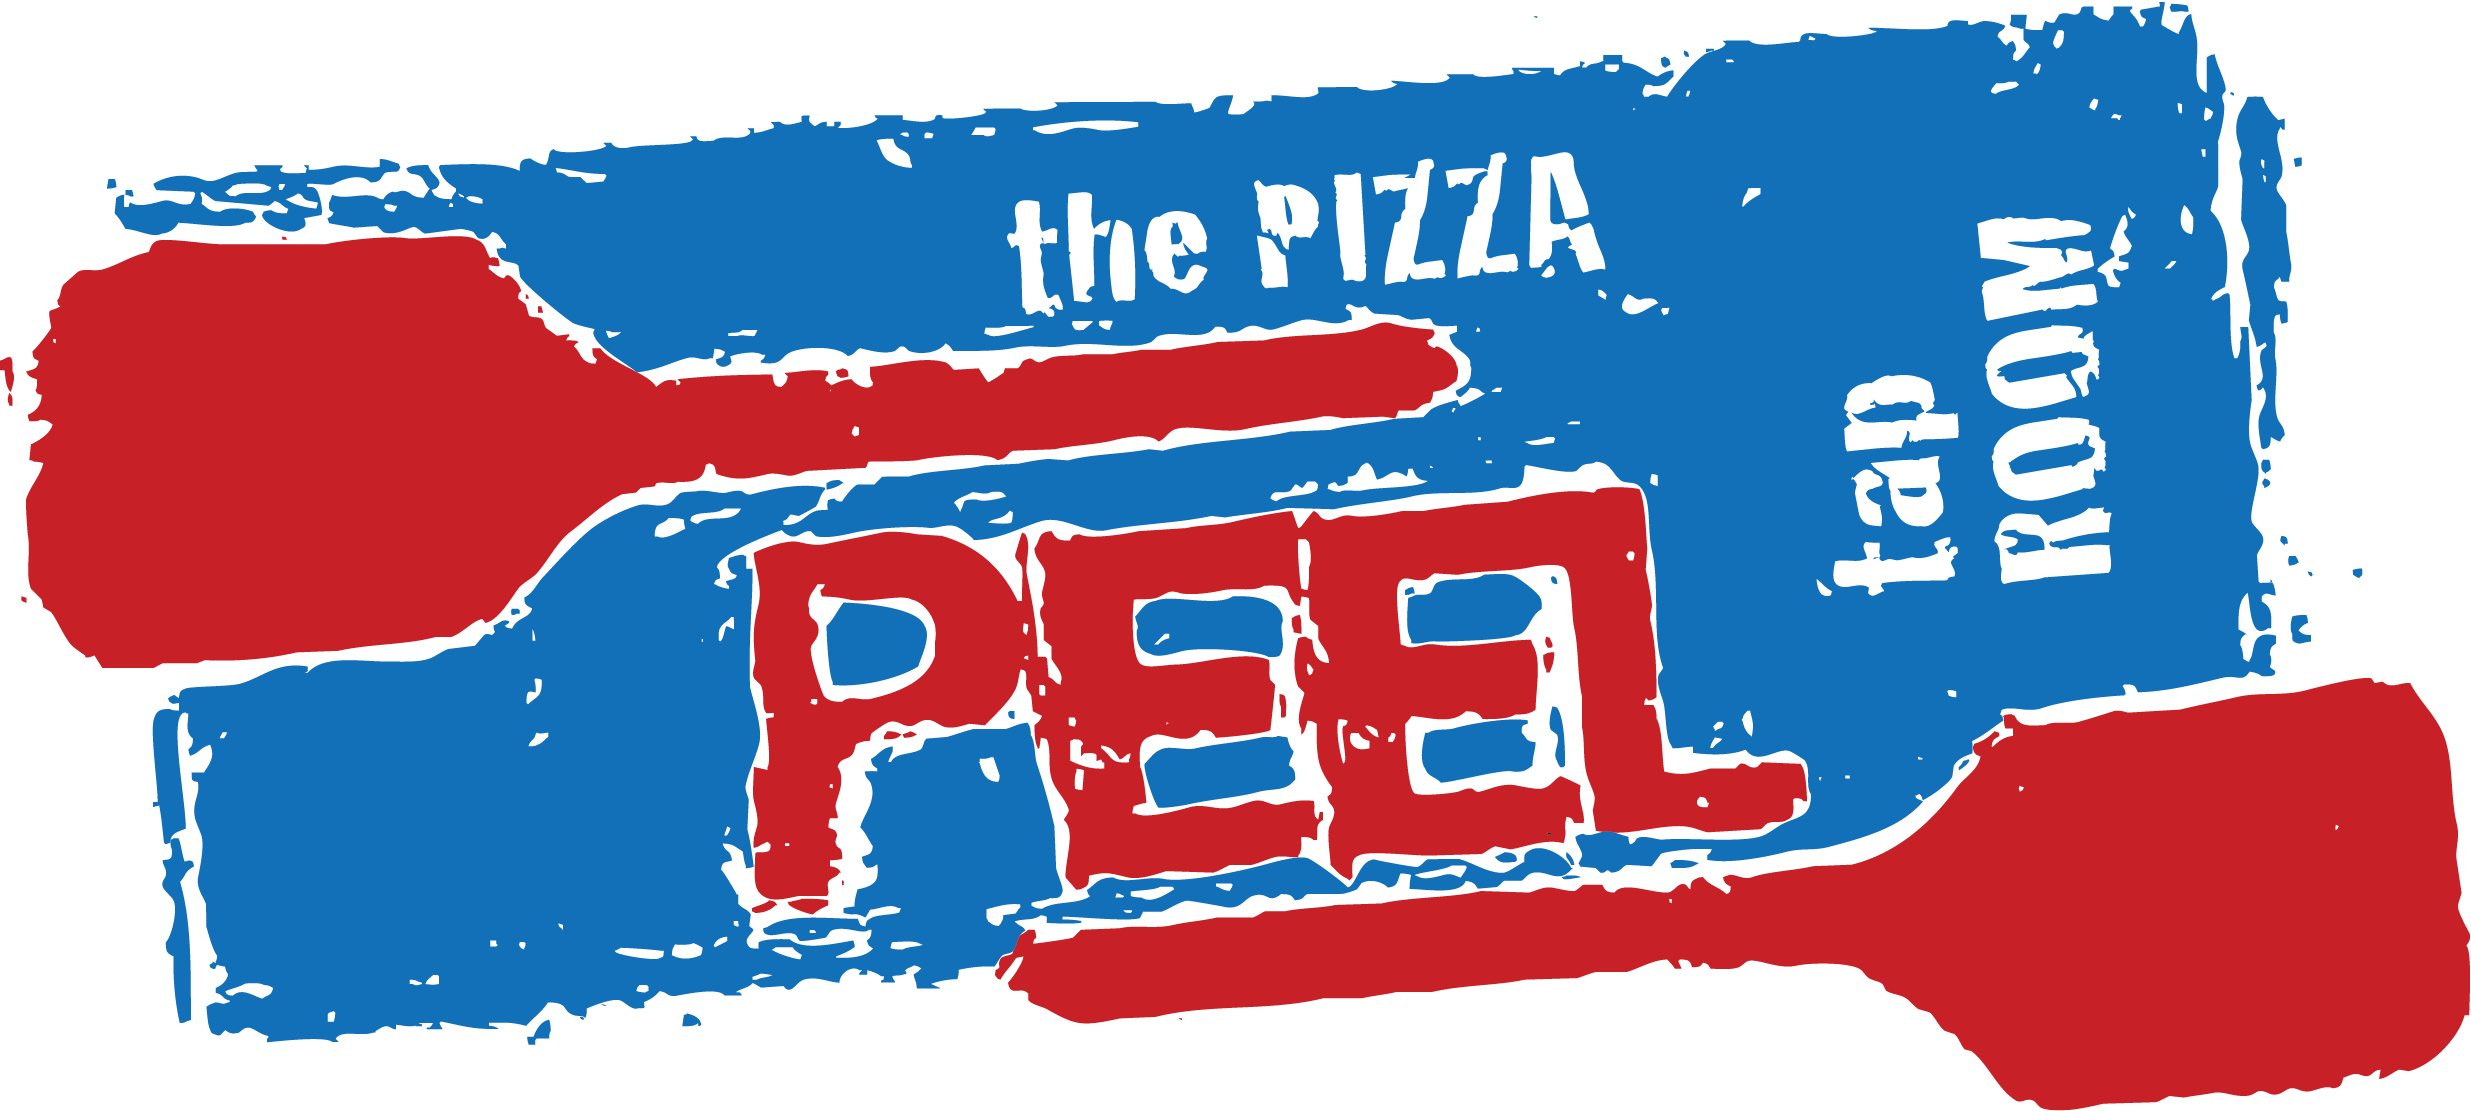 Pizza Peel and Tap Room logo